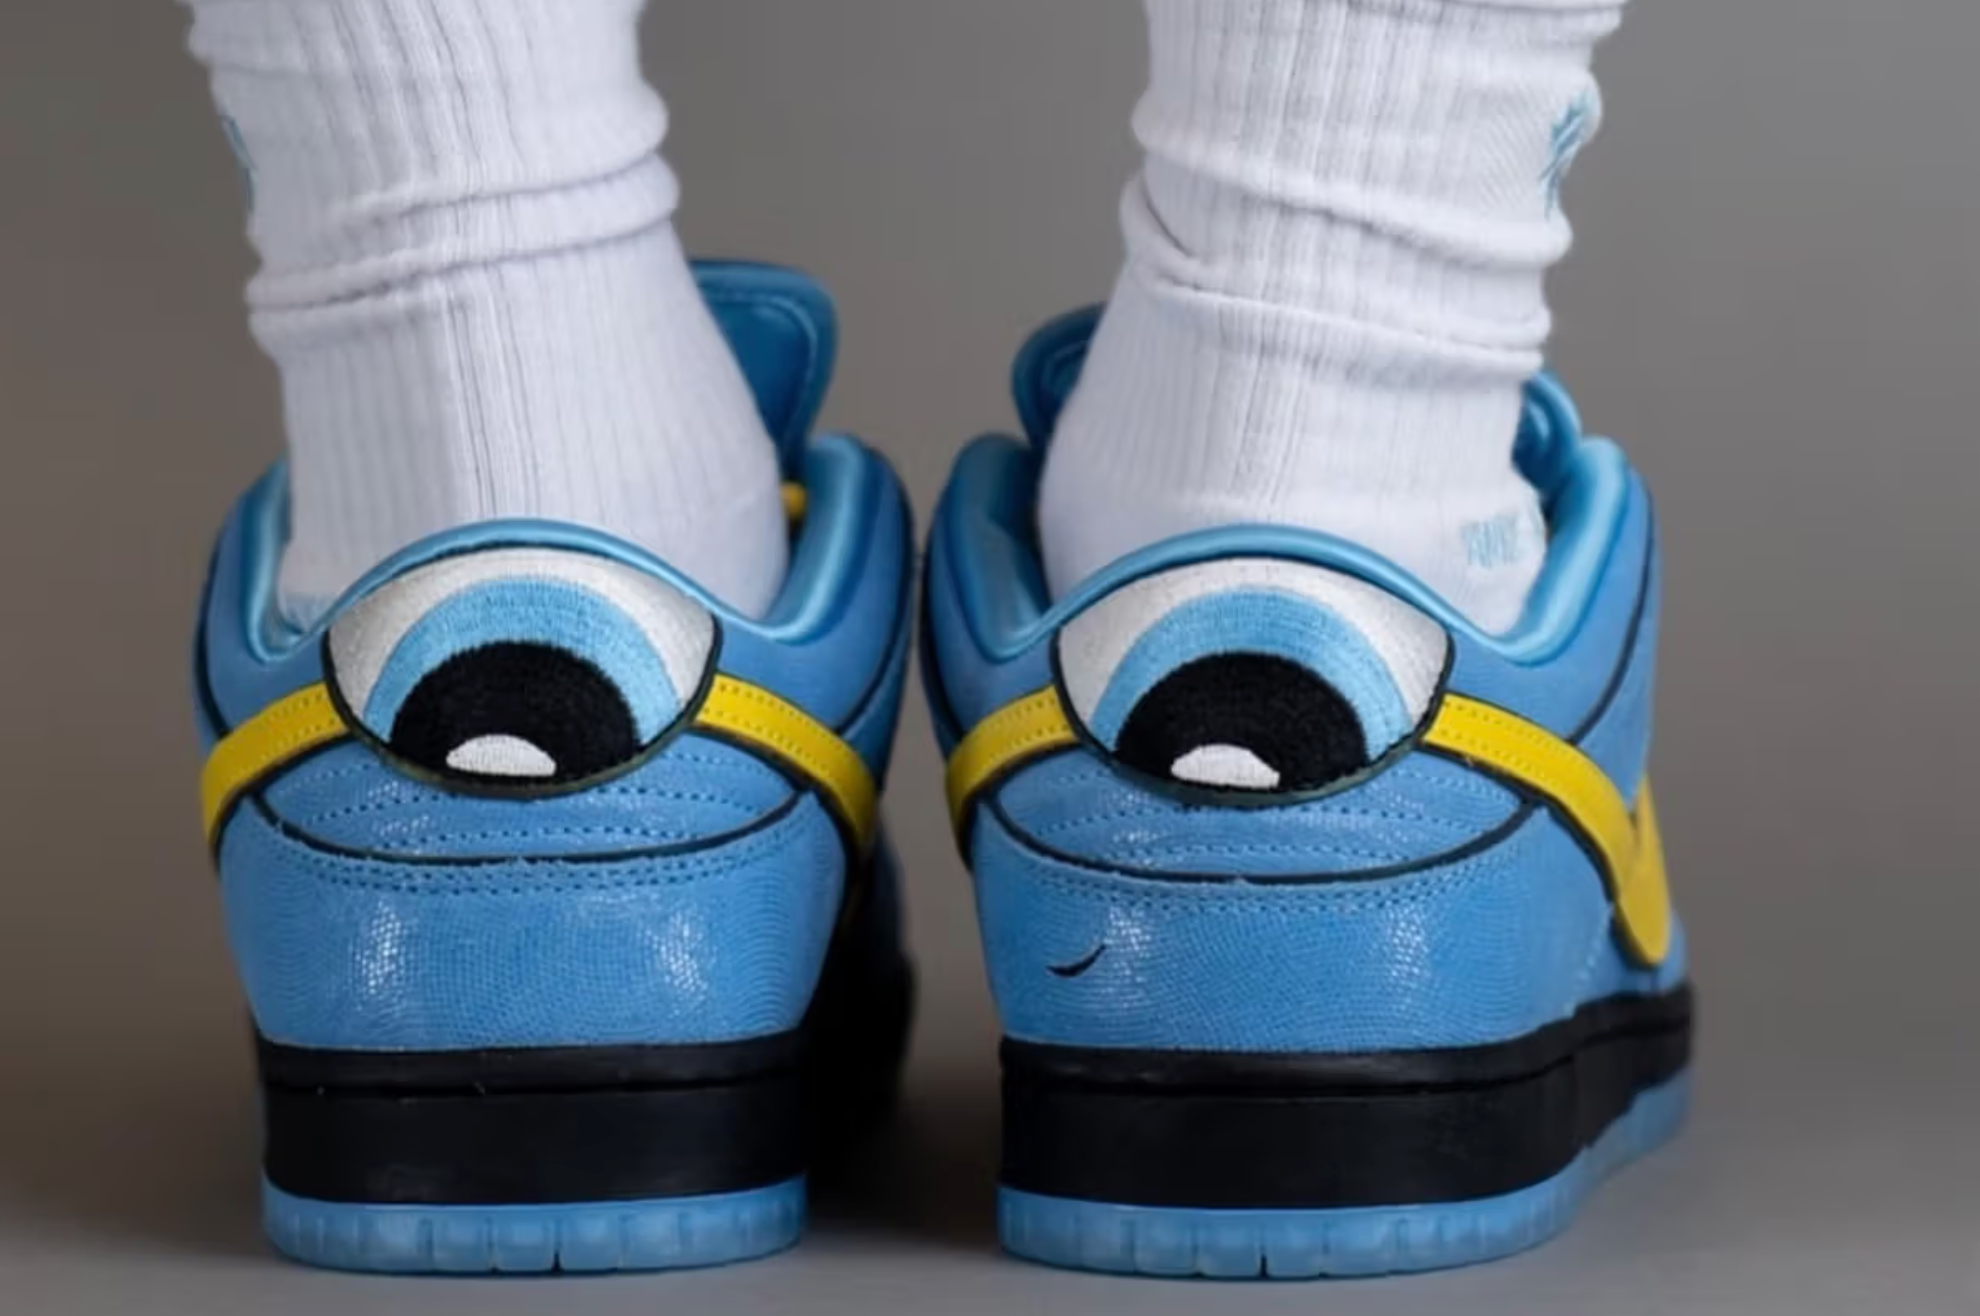 On-Feet Look at 'The Powerpuff Girls' x Nike SB Dunk Low "Bubbles"